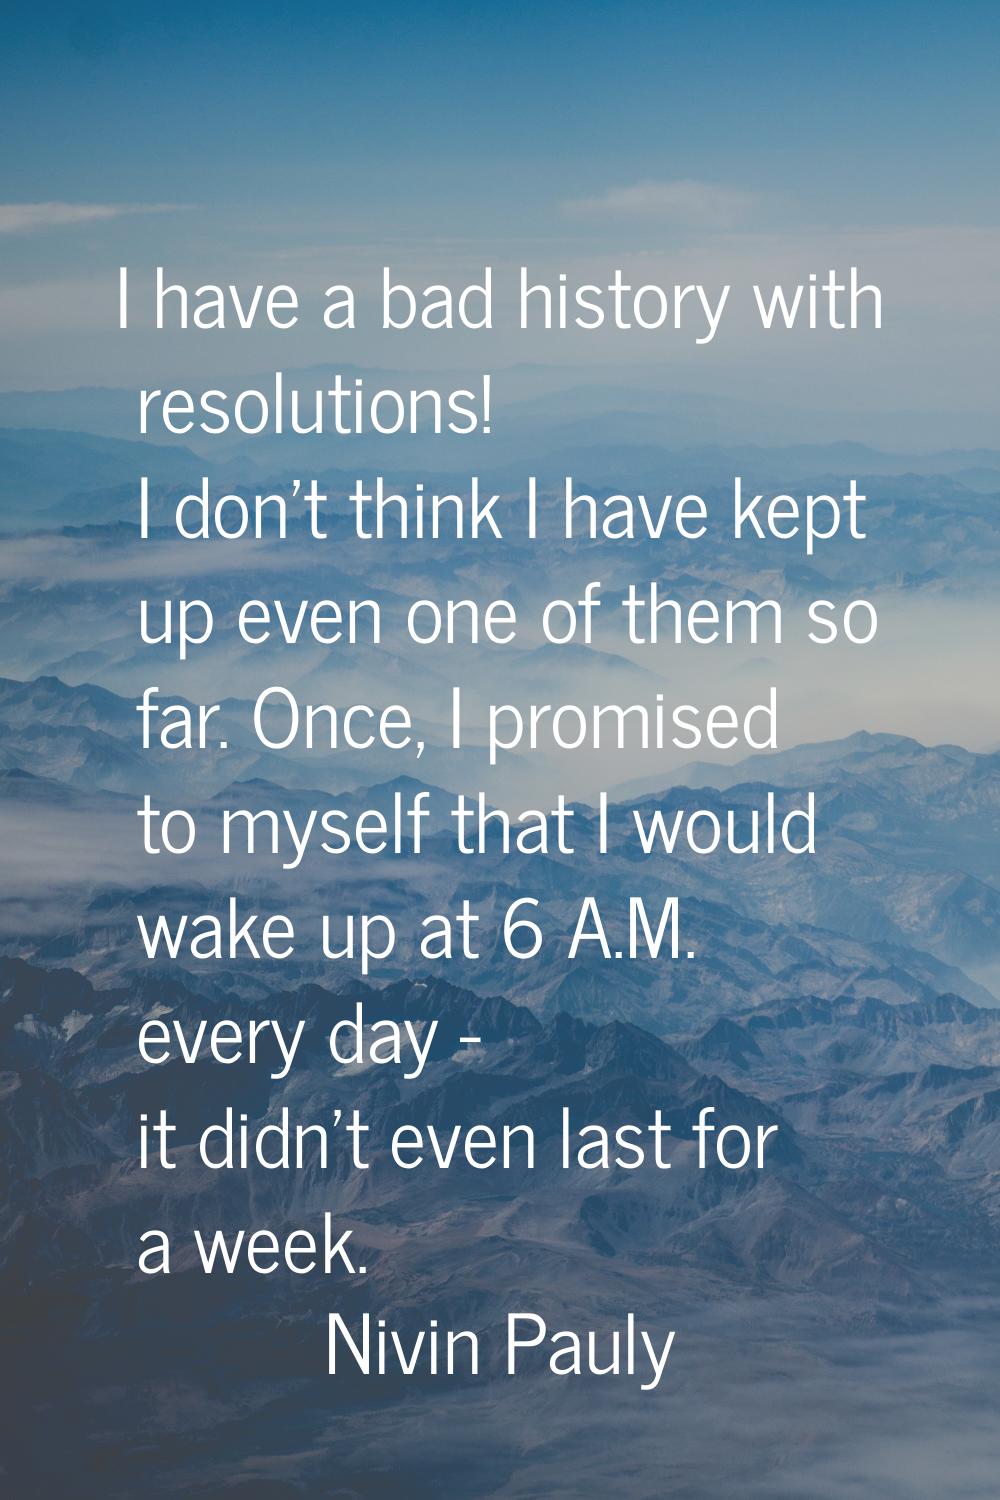 I have a bad history with resolutions! I don't think I have kept up even one of them so far. Once, 